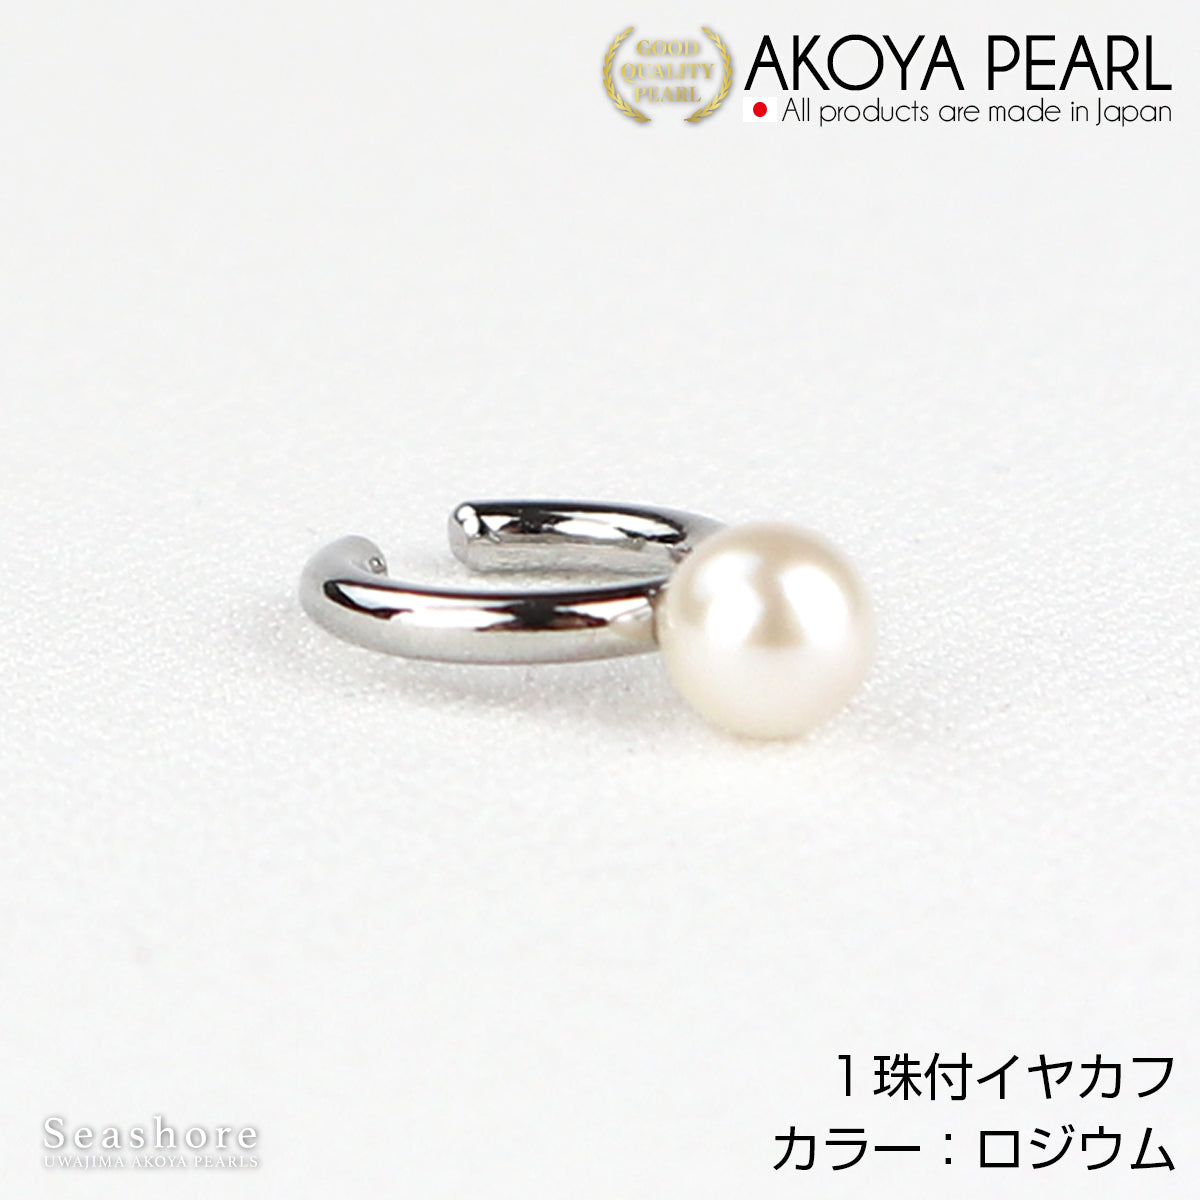 1 Akoya Pearl Pearl Ear Cuff for One Ear [5.5-6.0mm] [3 Colors] Brass Rhodium/Pink Gold/Gold